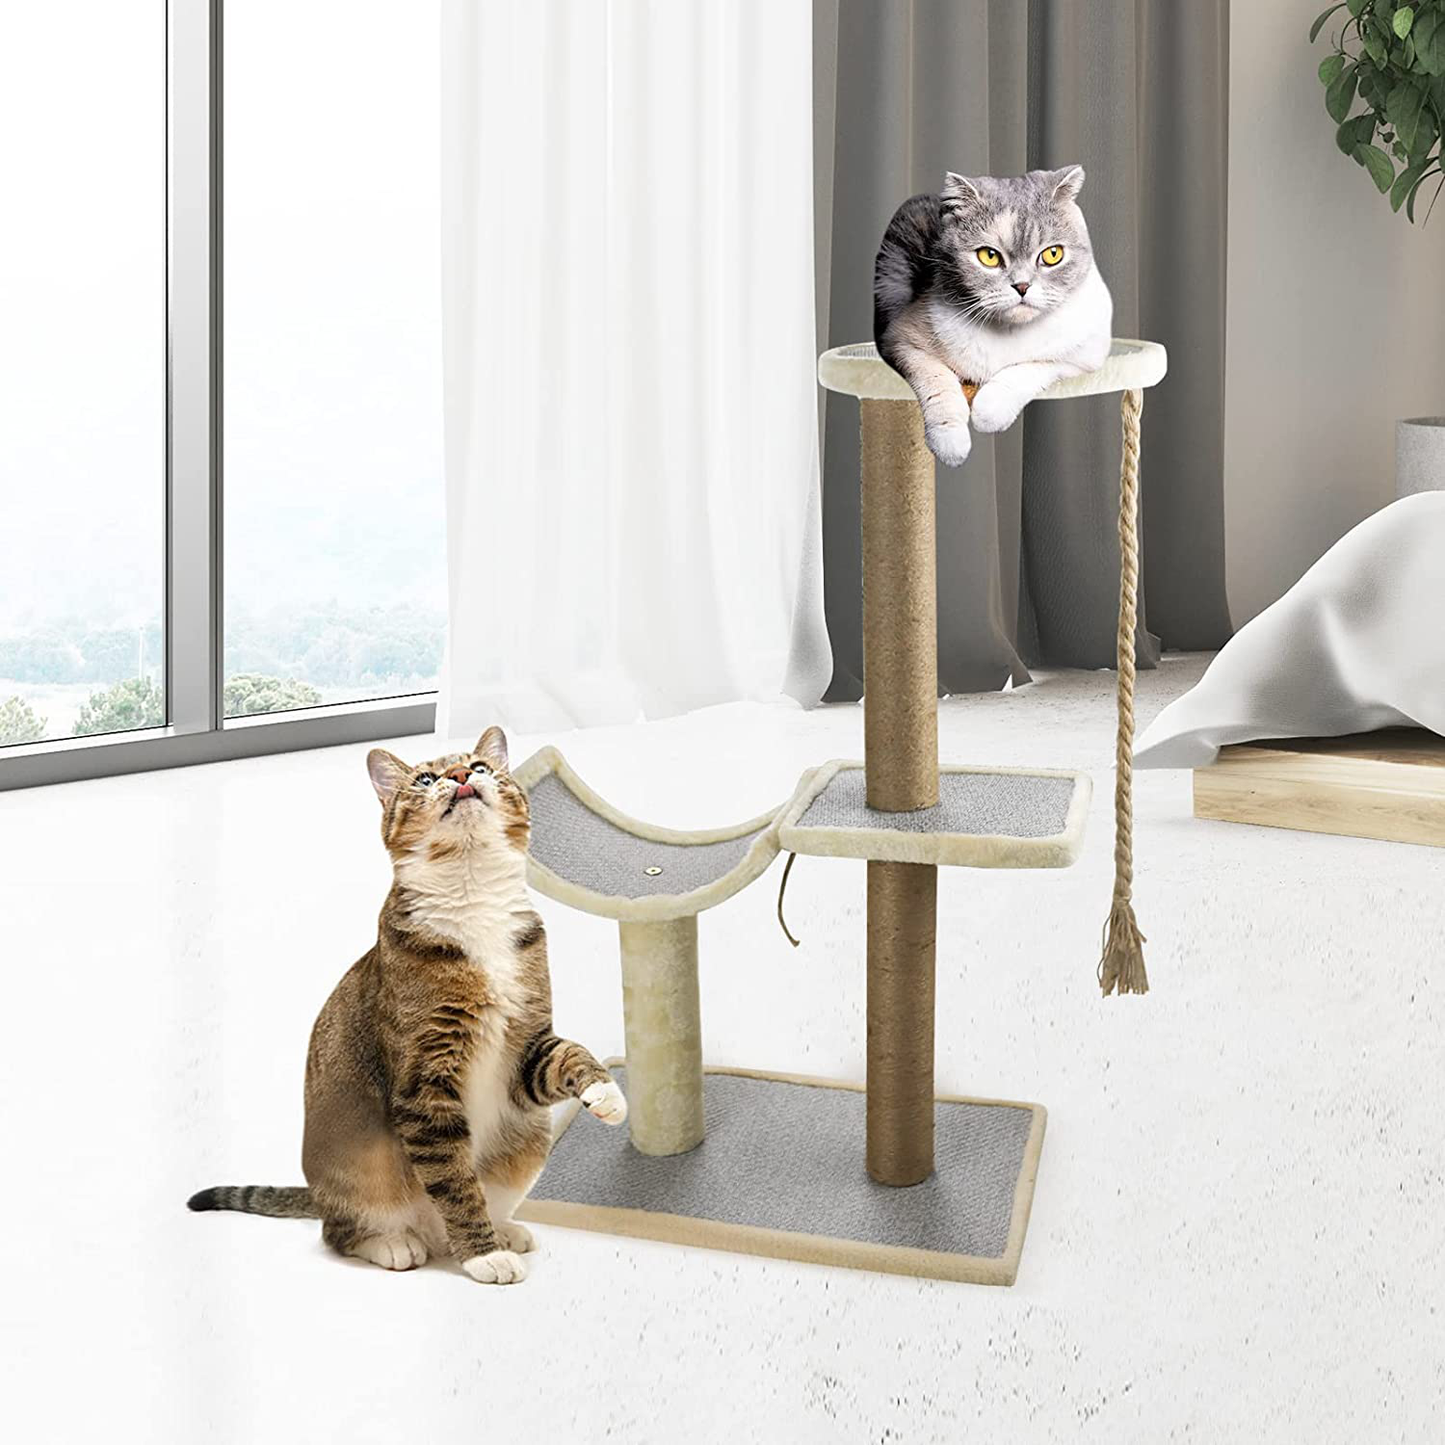 Sfozstra Multi-Level Cat Tree, Cat Climbing Frame with Plush Perches, Cat Jumping Platform Furniture Scratching Post for Playing, Relaxing and Sleeping, Suitable for Cats and Other Pets